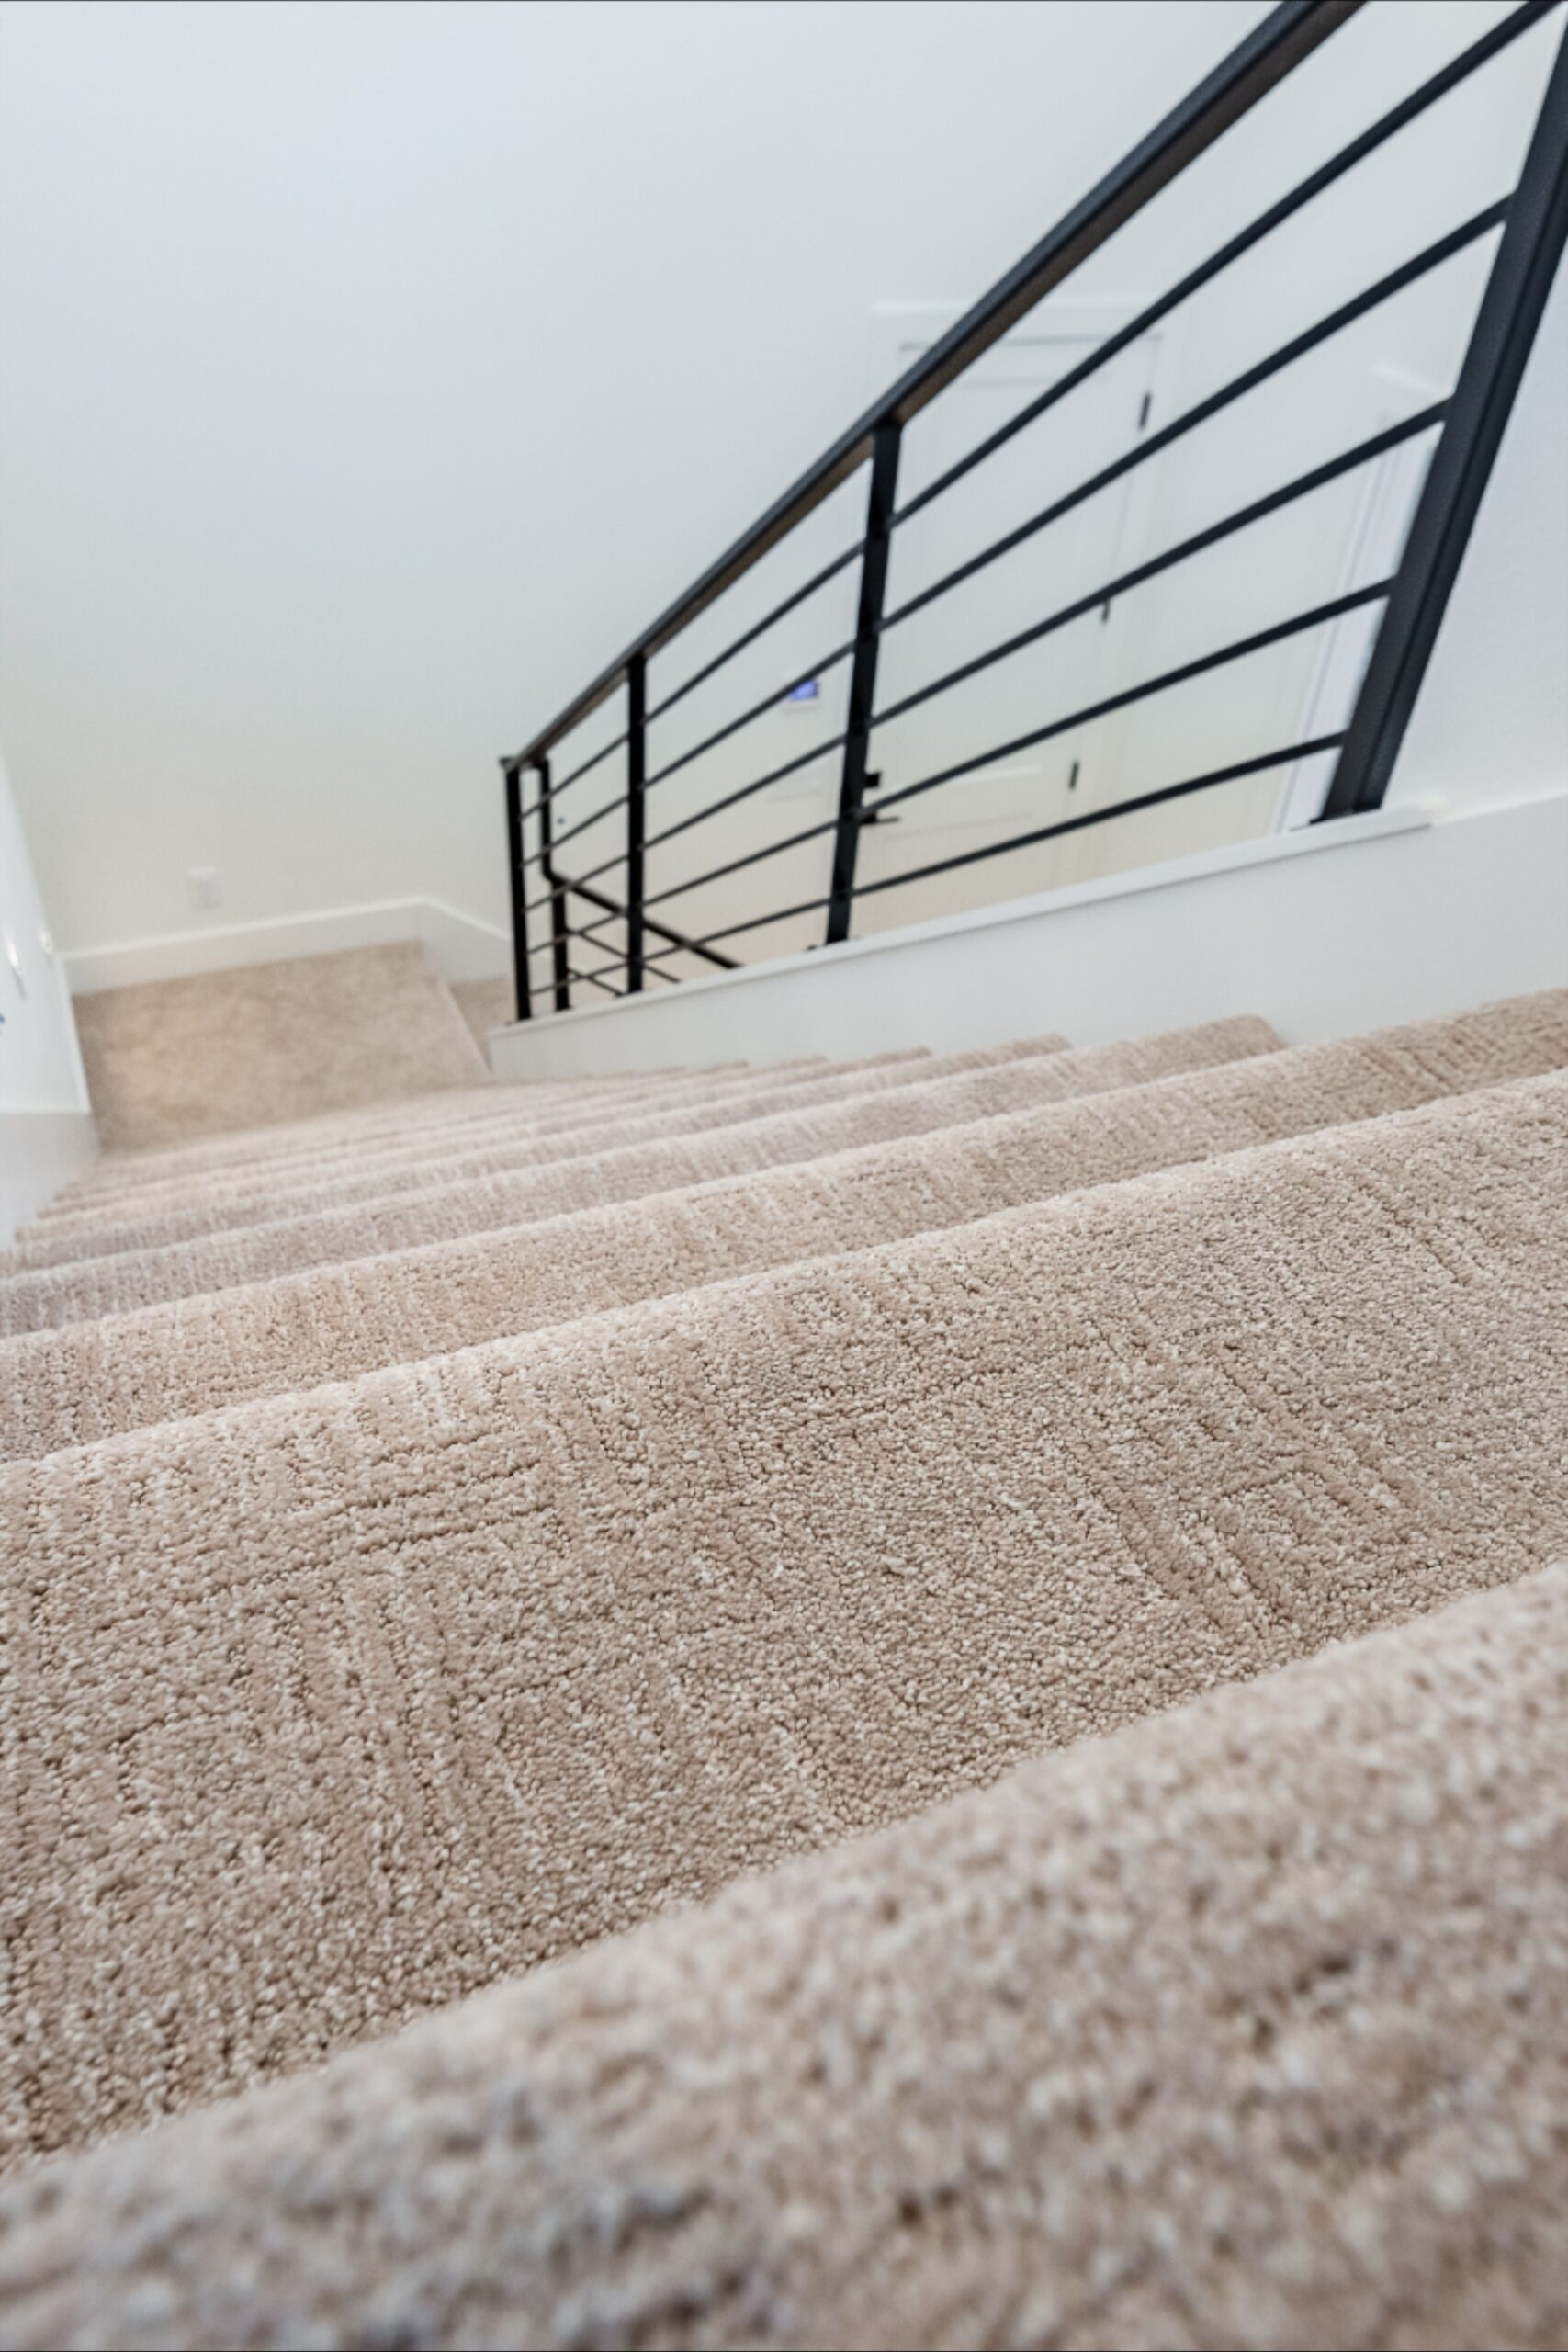 Mohawk Carpet Offers Unmatched Quality Furnishing to Your hOme